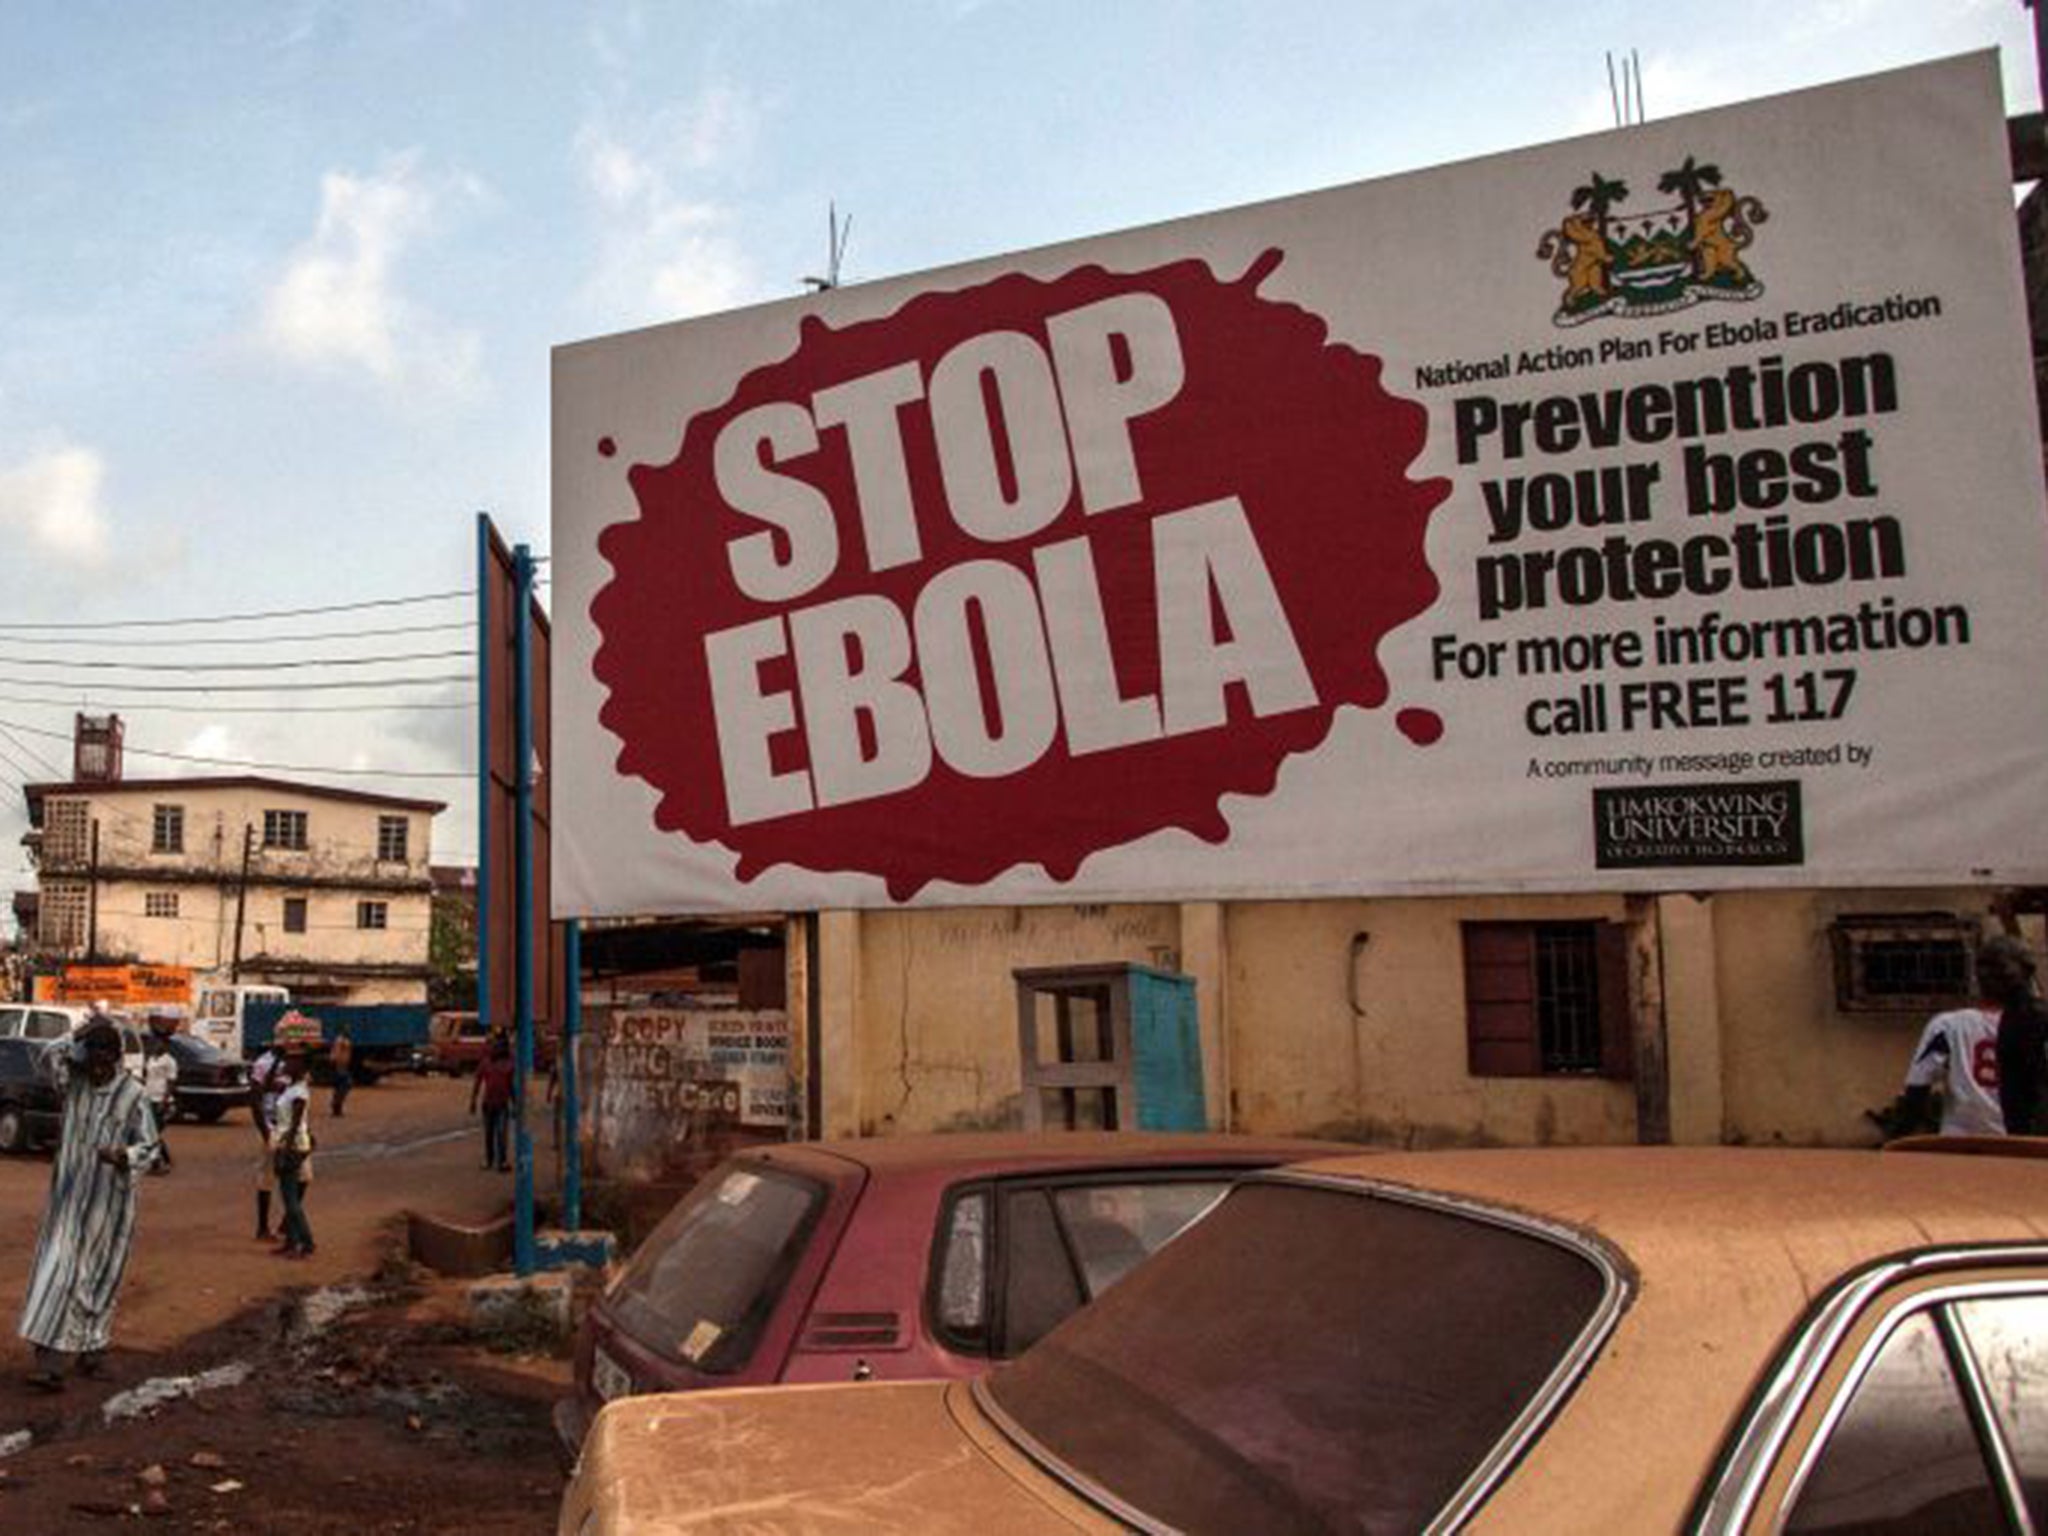 An awareness campaign poster in Freetown, Sierra Leone